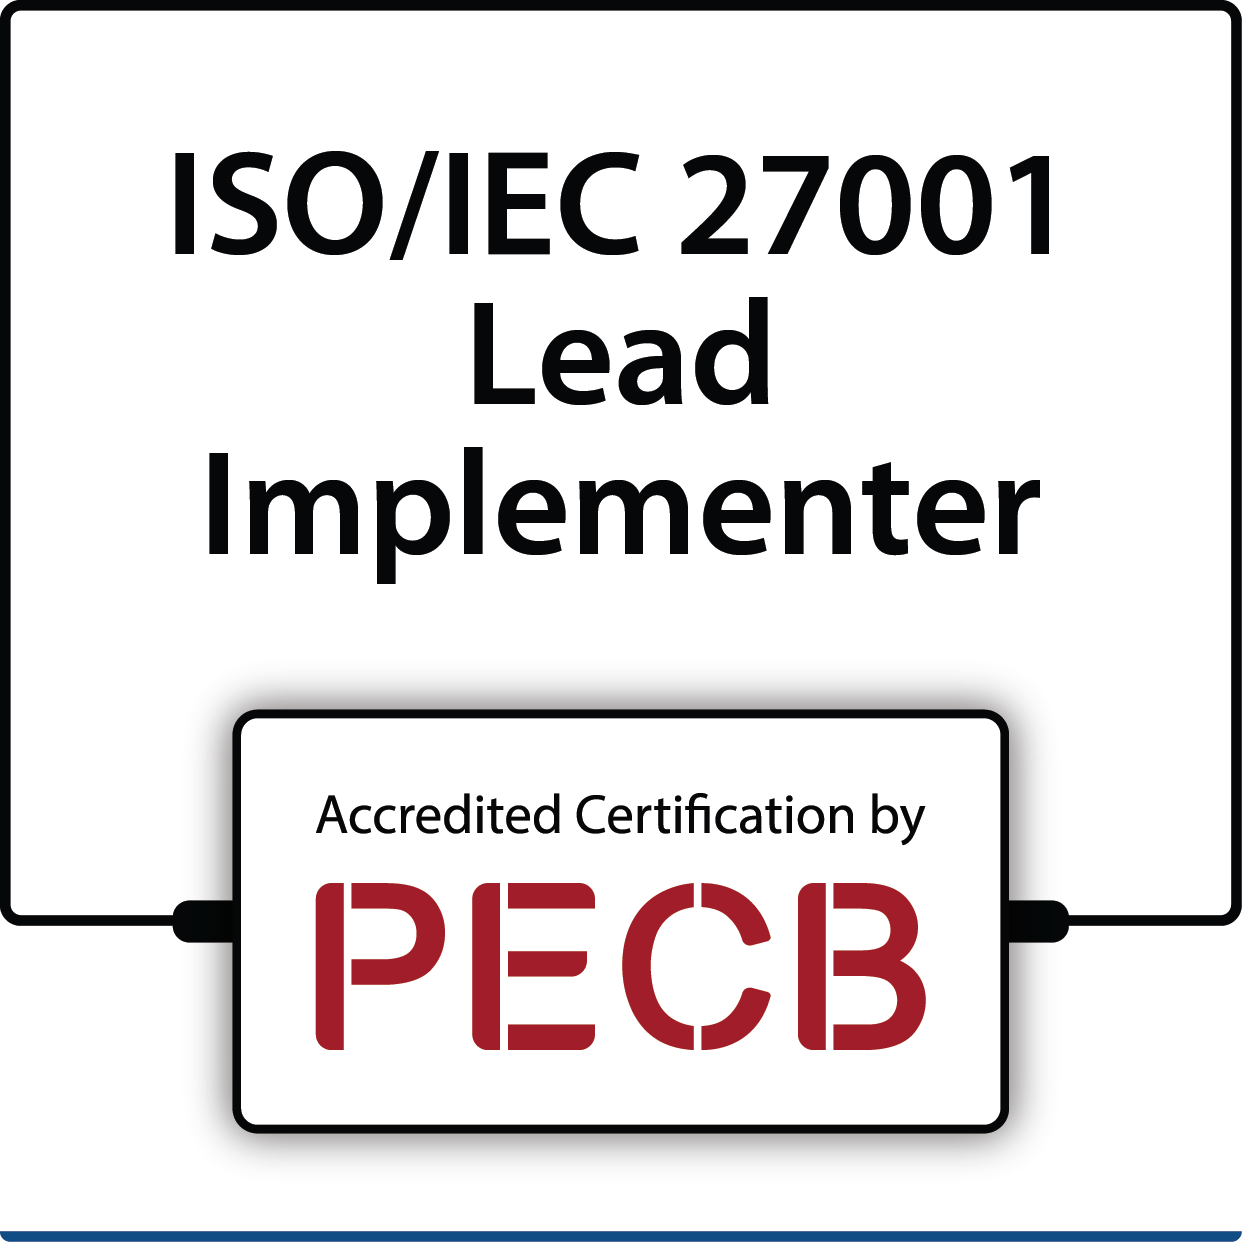 ISO/IEC 27001 Lead Implementer certification